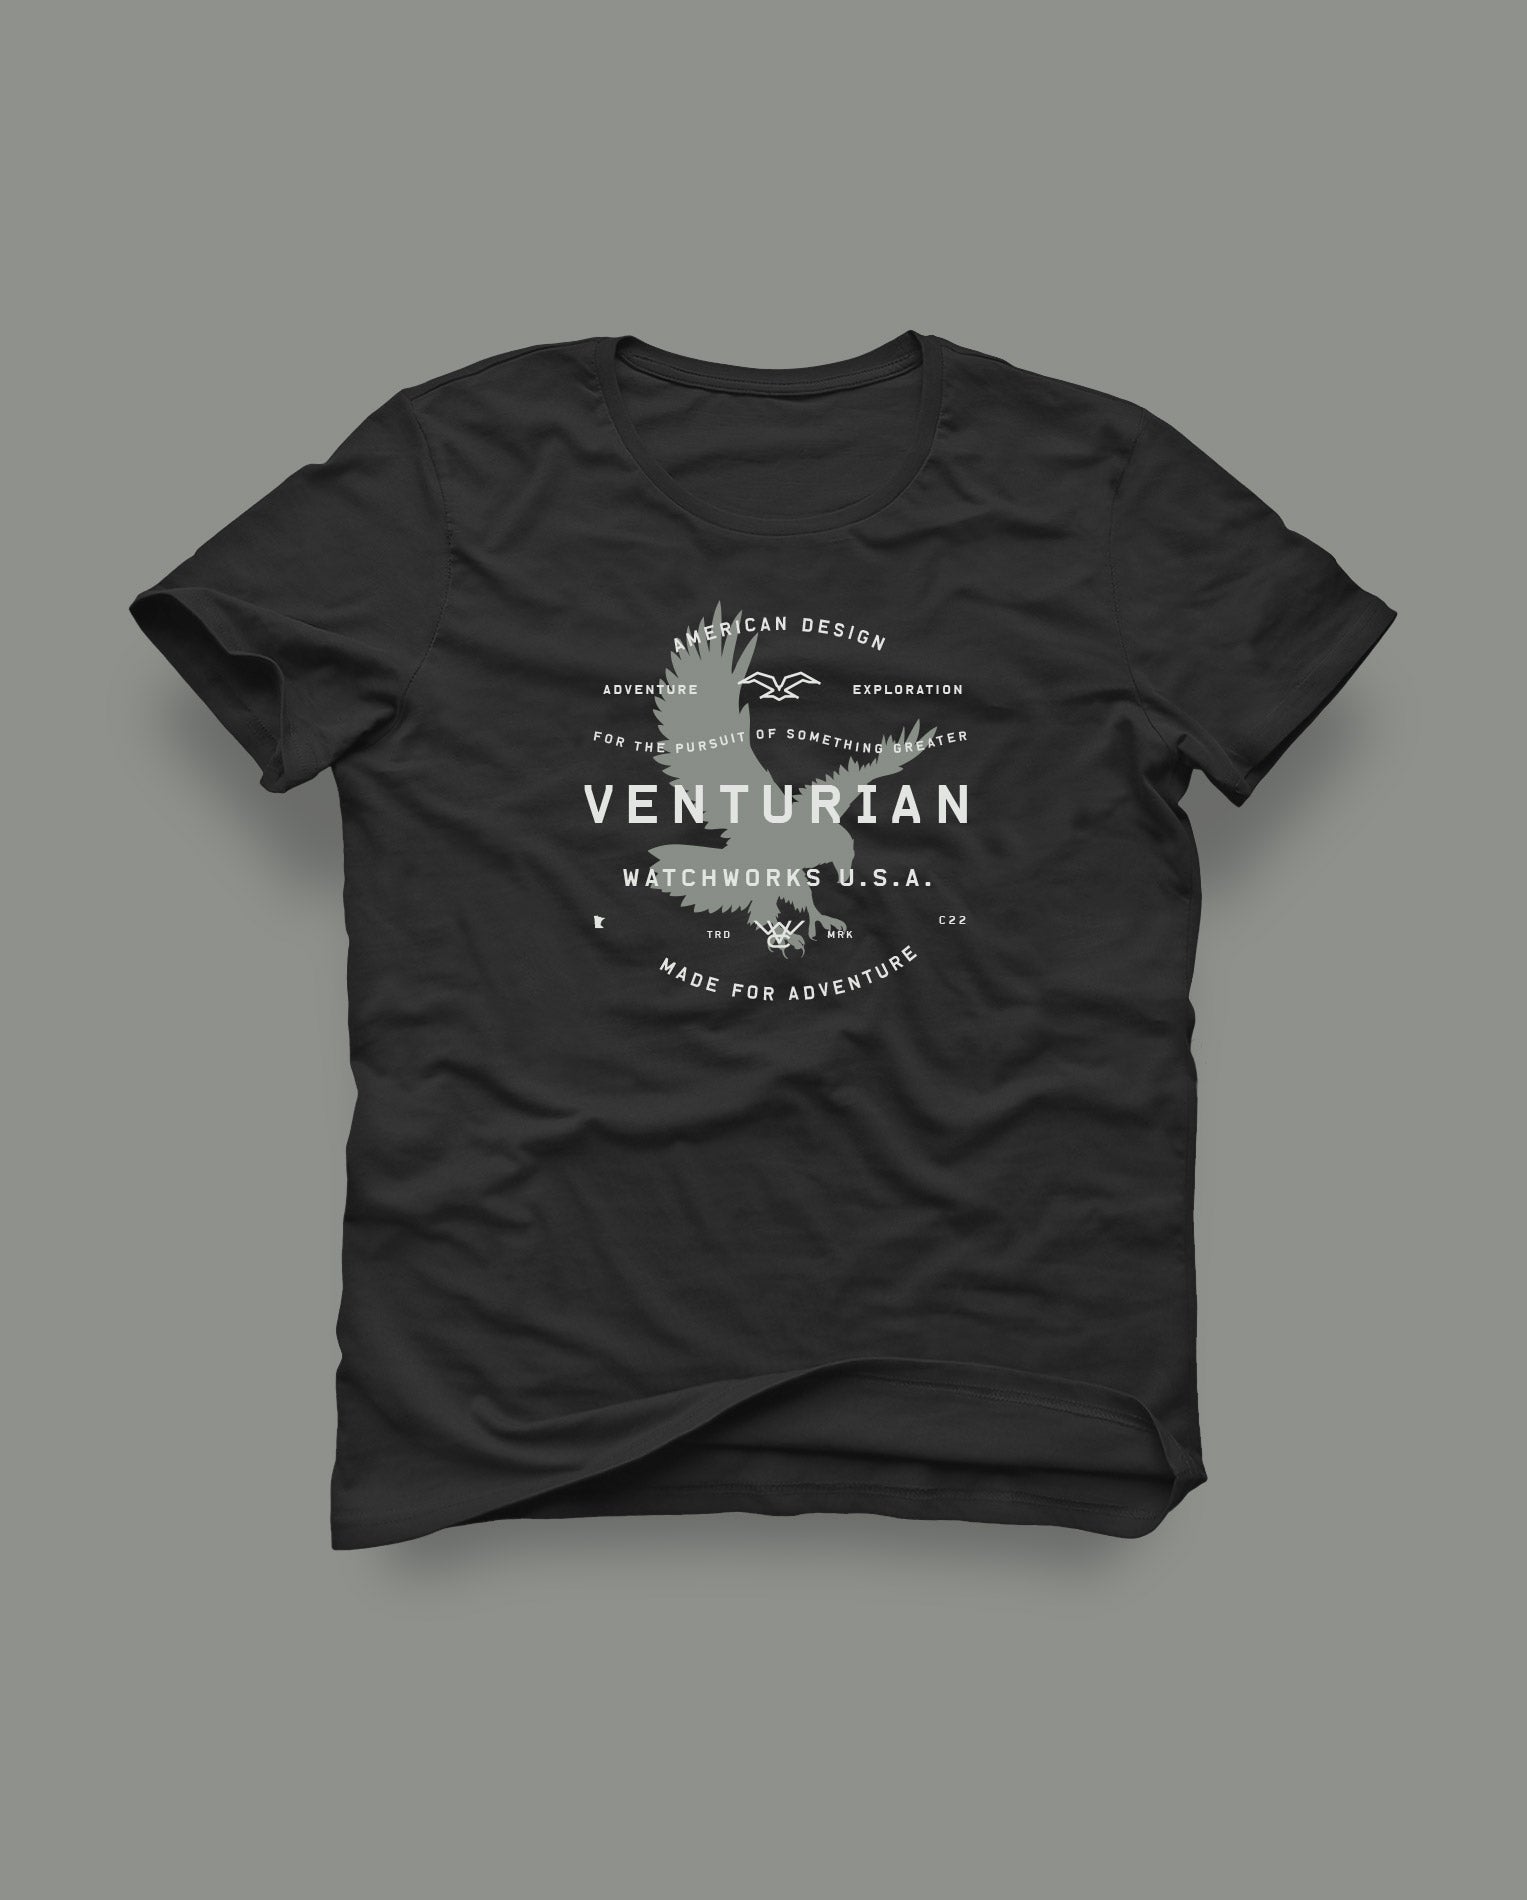 Venturian WatchWorks bald eagle t shirt in multiple colors. Bella + Canvas triblend. Soft. Athletic. Comfortable.